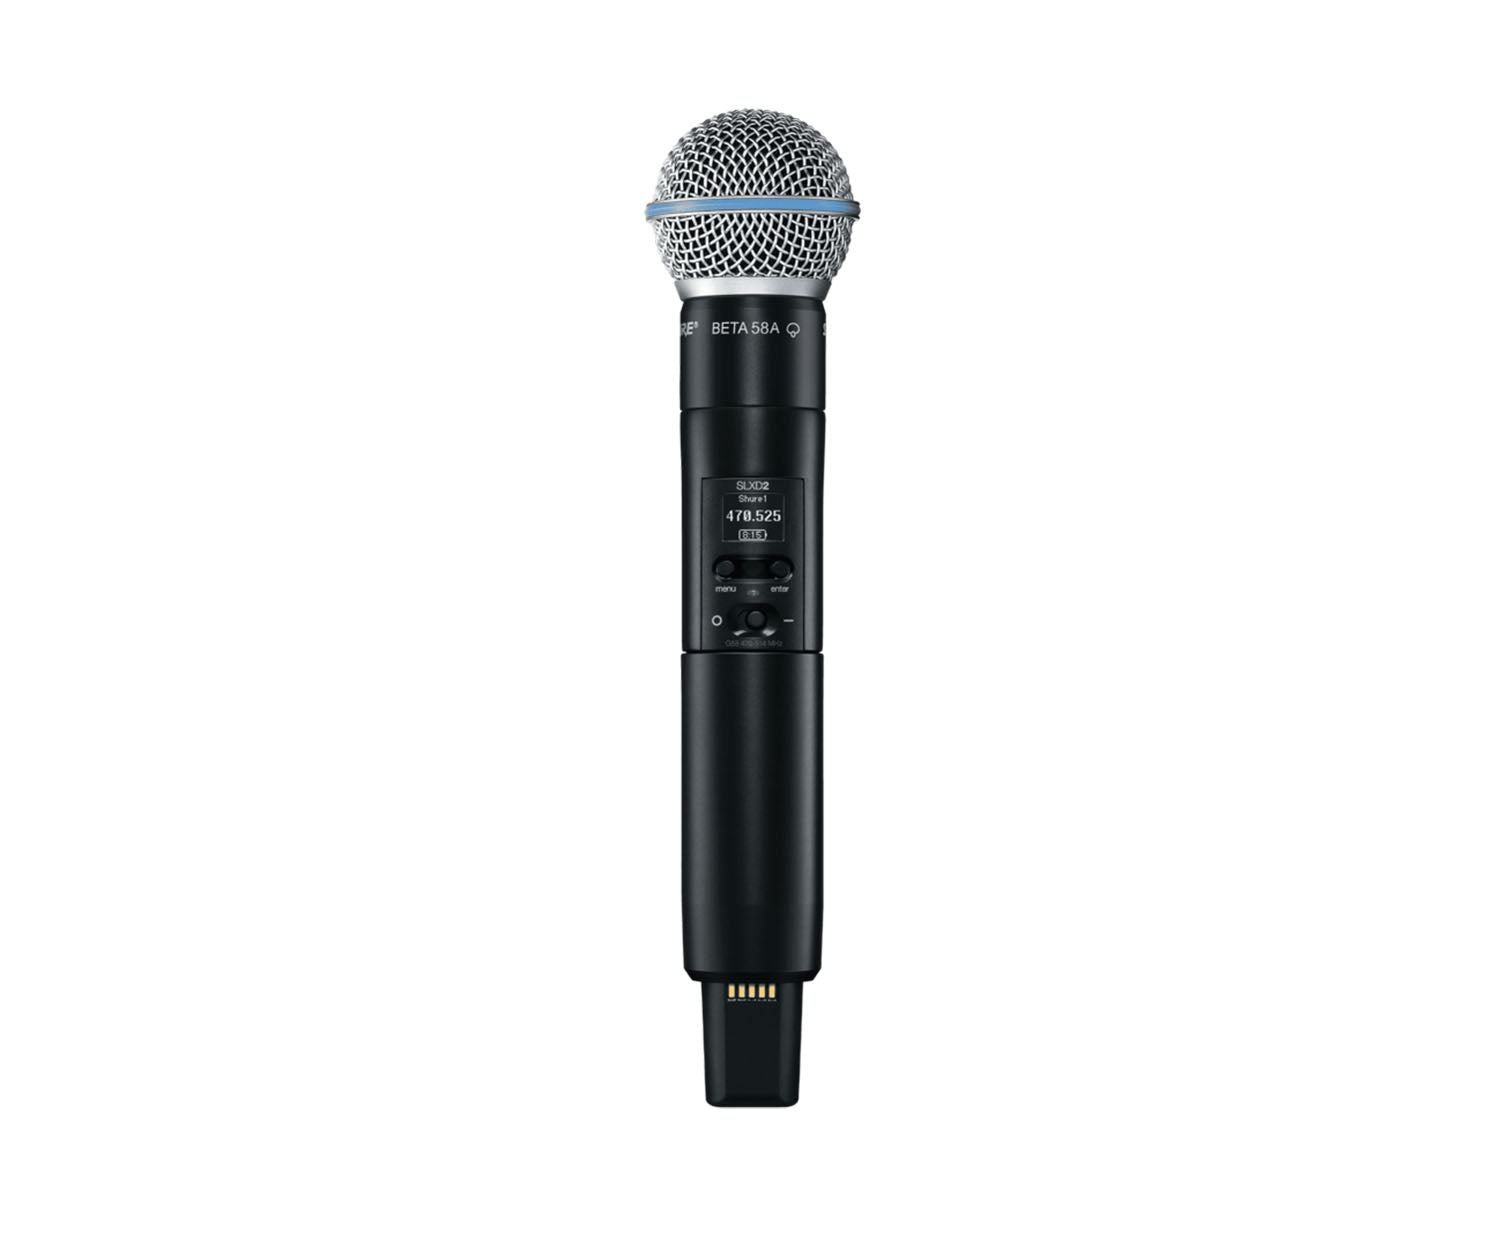 B-Stock: Shure SLXD2/B58-H55 Handheld Wireless Microphone Transmitter with Beta 58A Interchangeable Capsule - H55 (514-558 MHz)